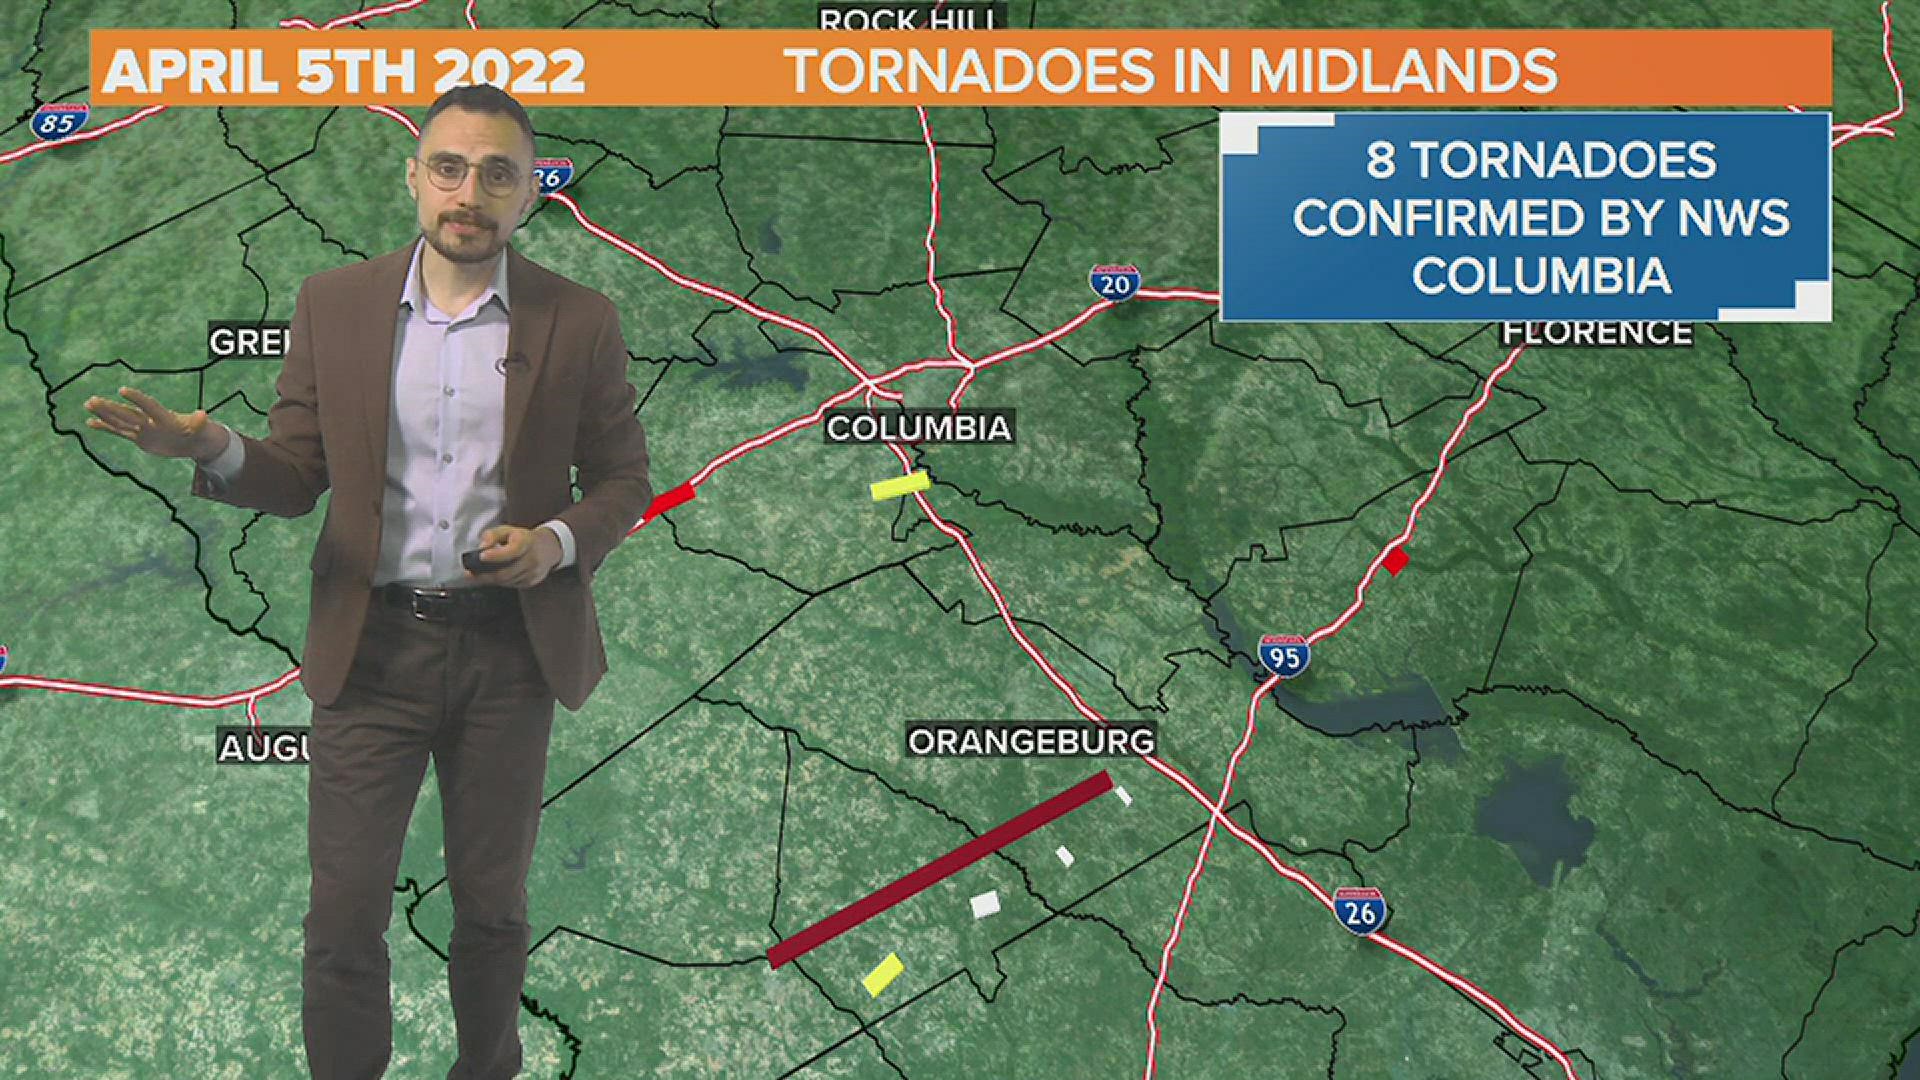 The National Weather Service confirms 8 tornadoes touched down in the South Carolina Midlands on April 5, 2022. The strongest was an EF-3 with 160 mph winds.